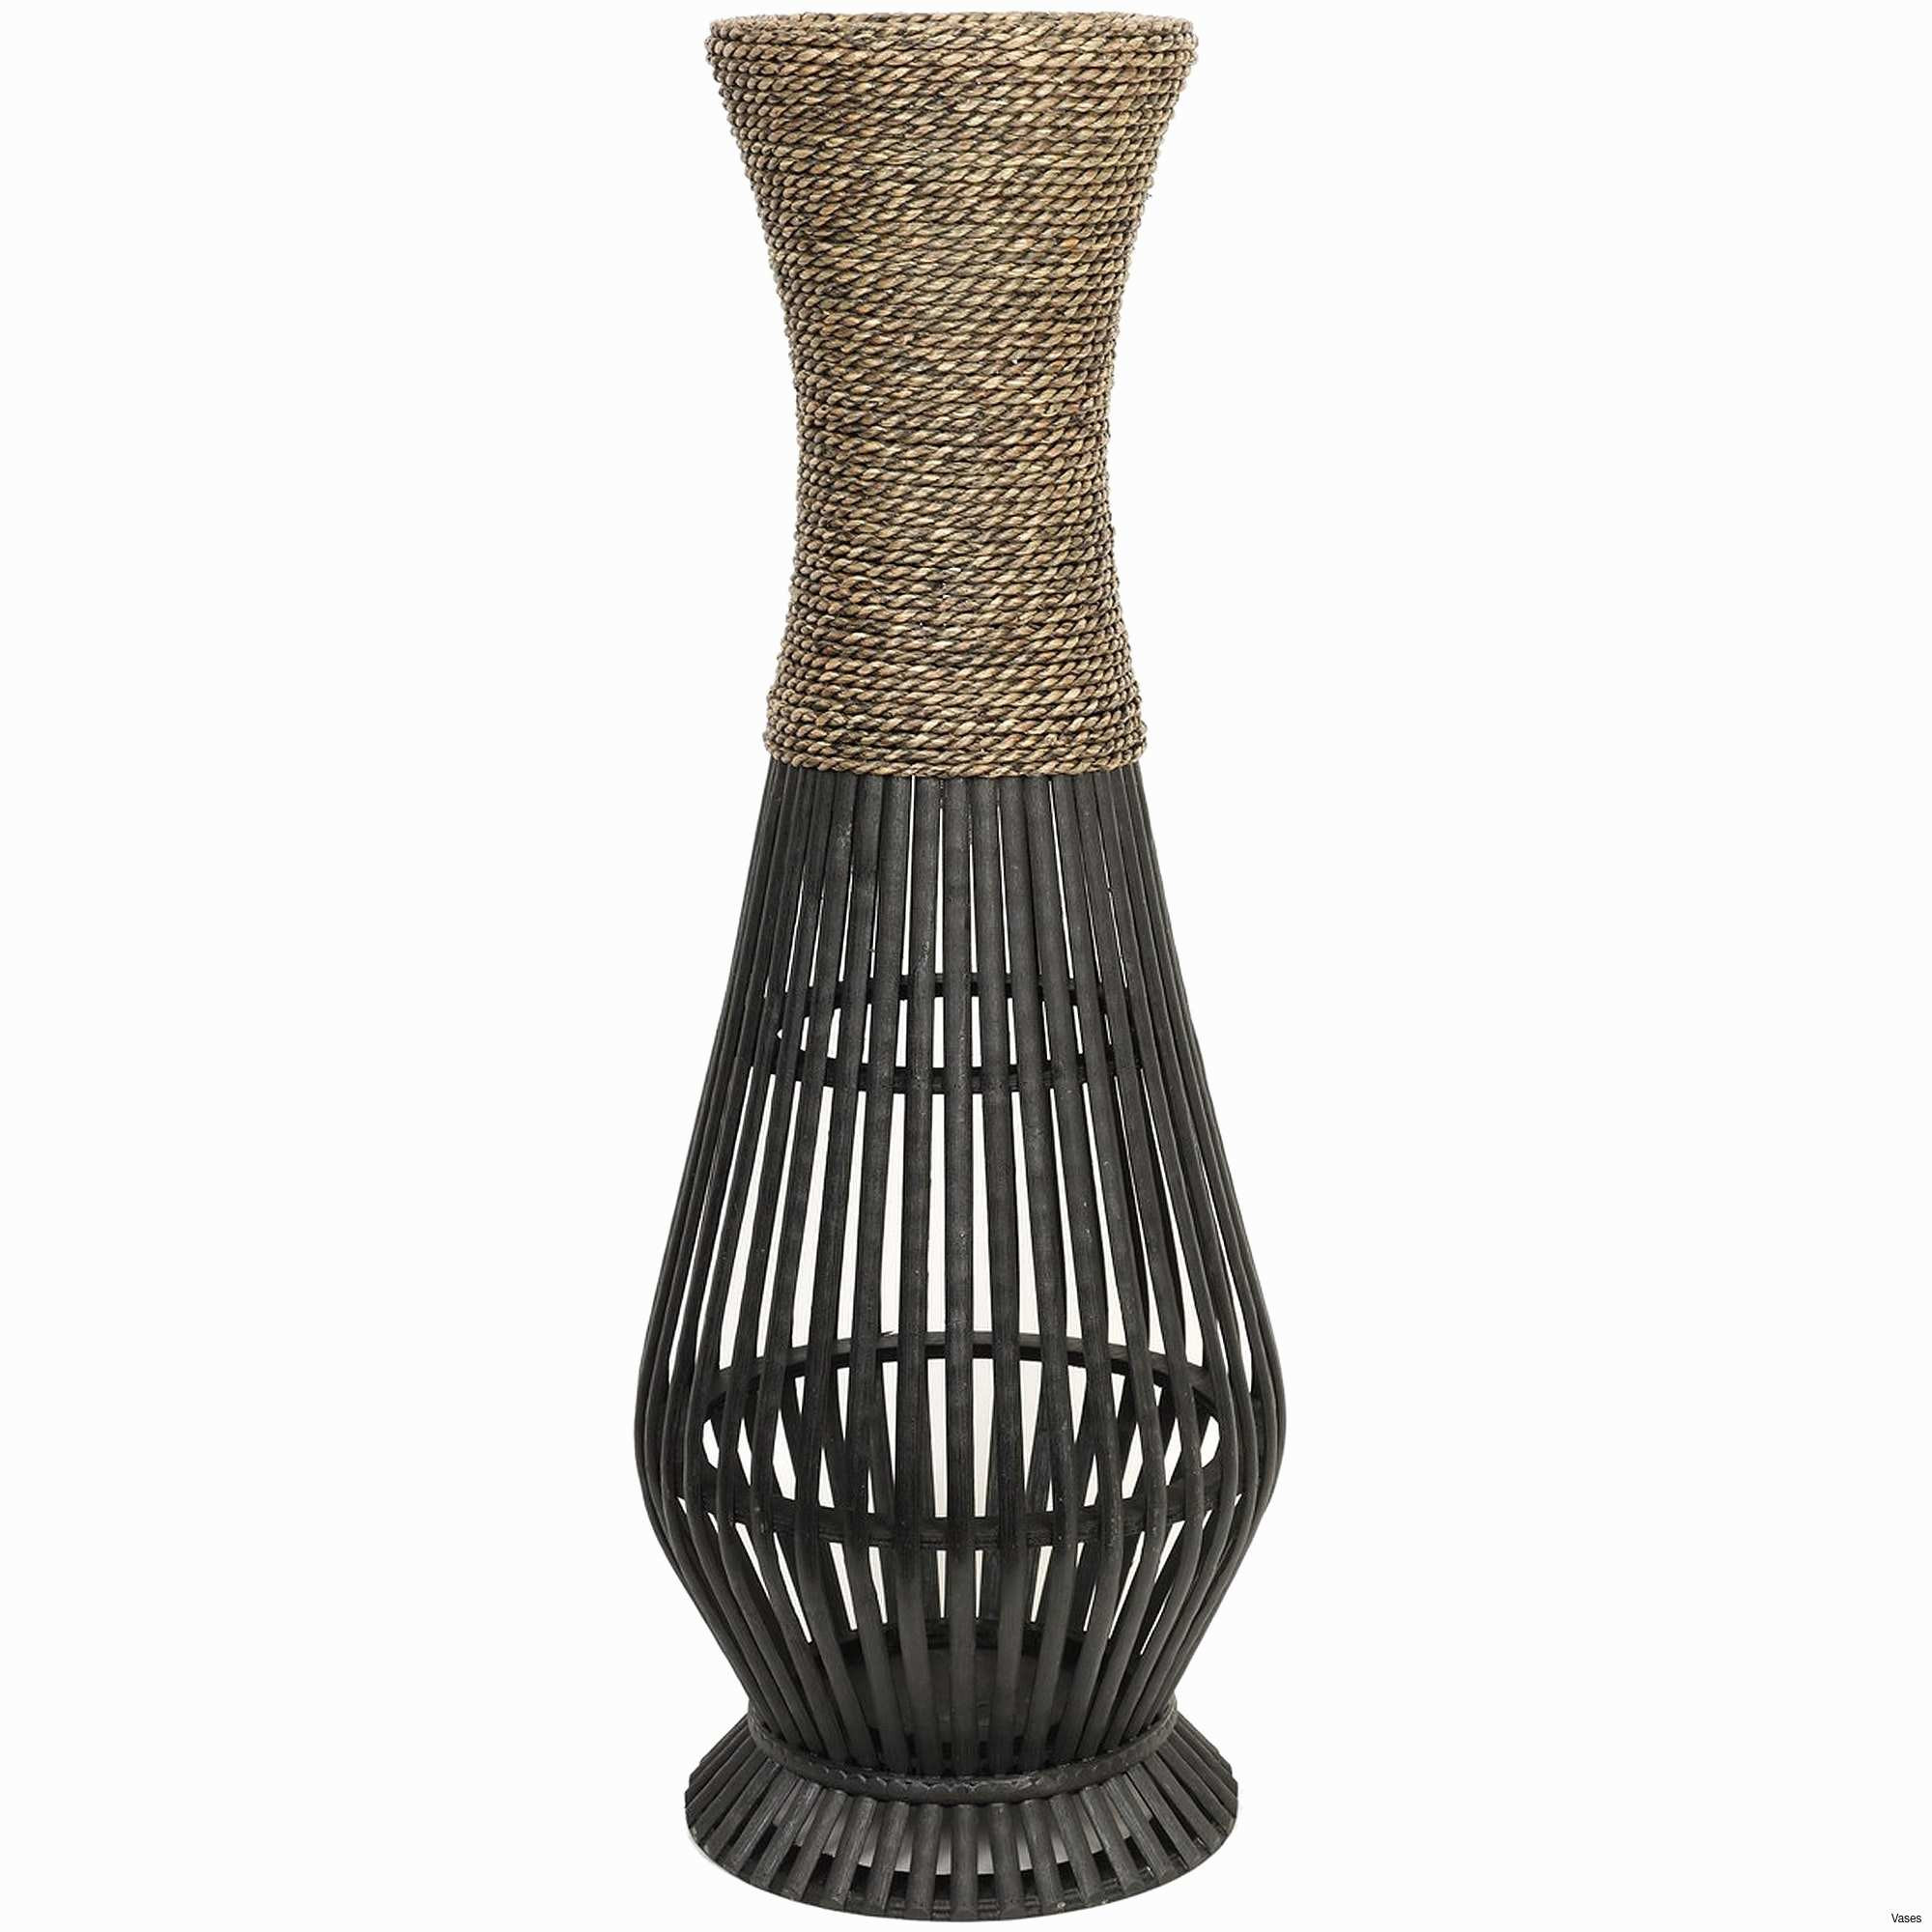 16 Trendy Mosaic Floor Vase 2024 free download mosaic floor vase of tall wood floor vase collection wooden home decor lovely d dkbrw in tall wood floor vase collection wooden home decor lovely d dkbrw 5743 1h vases tall wood vase i 0d